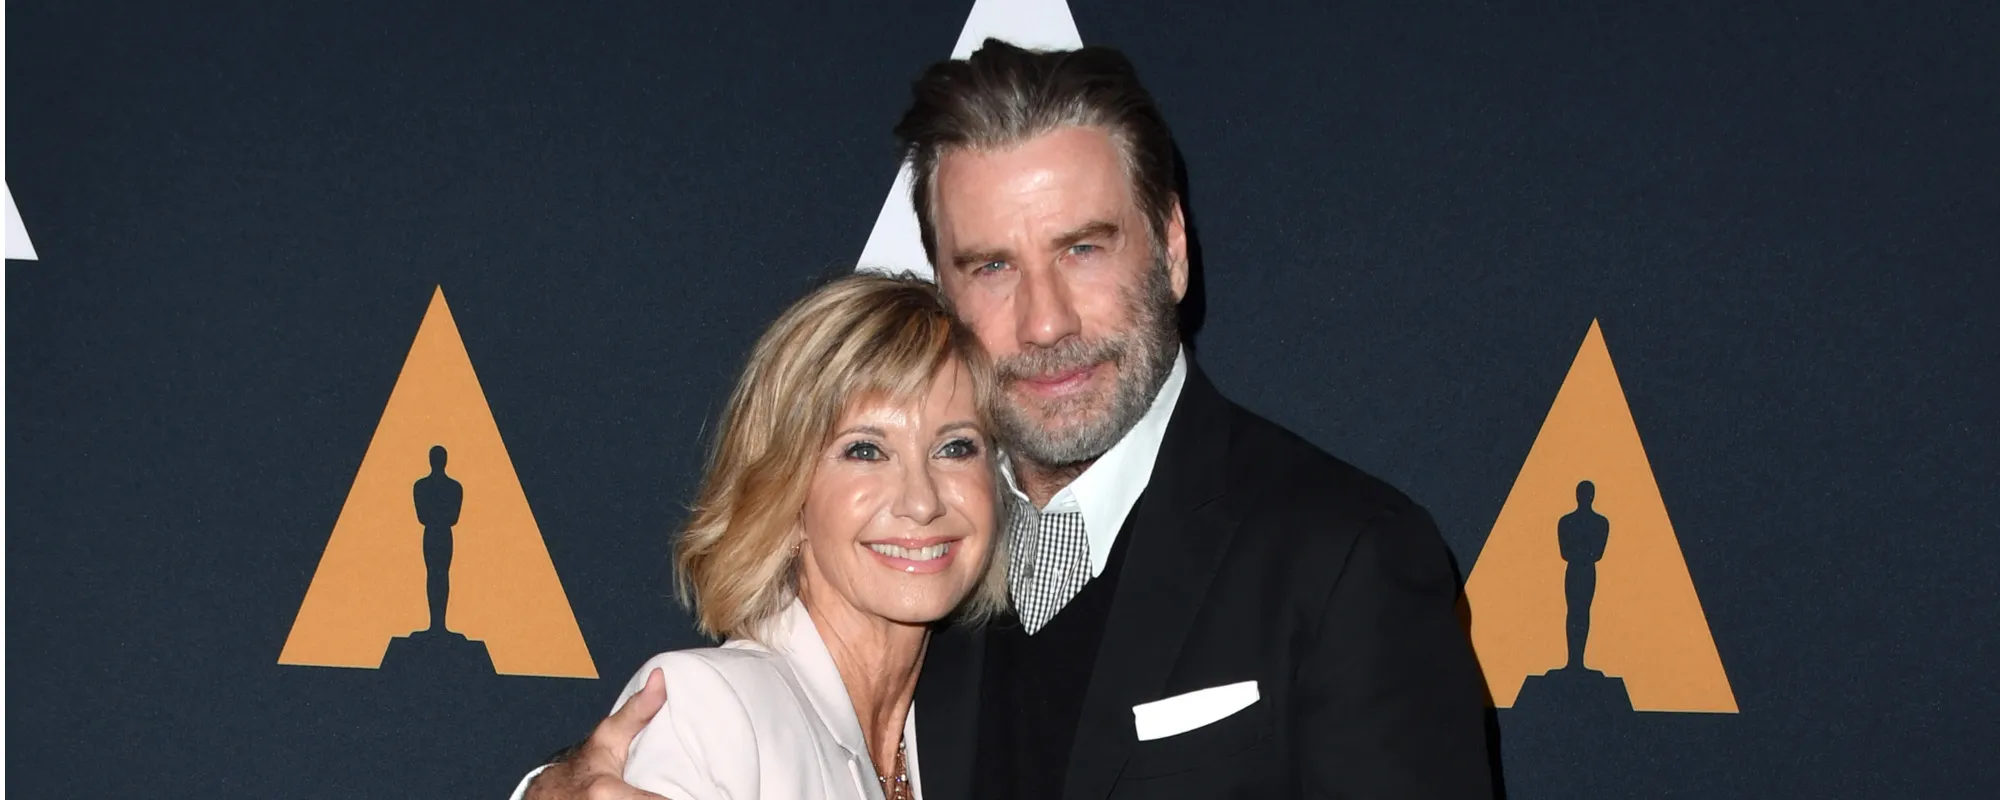 The Grease Sequel We Never Had: AI Imagines ‘Grease 3’ Duet for Olivia Newton-John and John Travolta